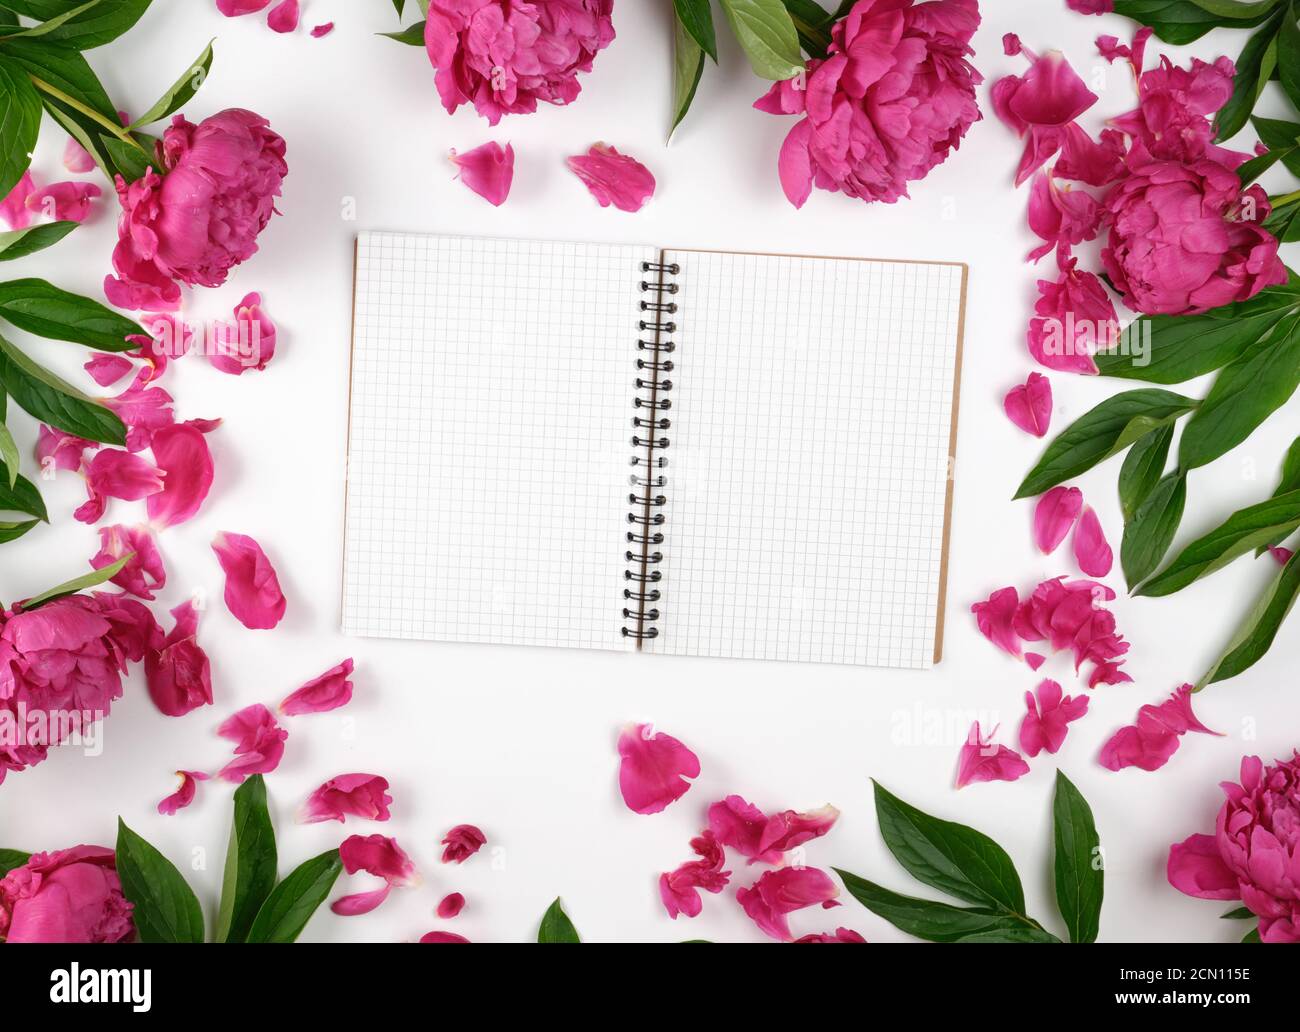 open blank notebook with white sheets and blooming red peonies with green leaves Stock Photo